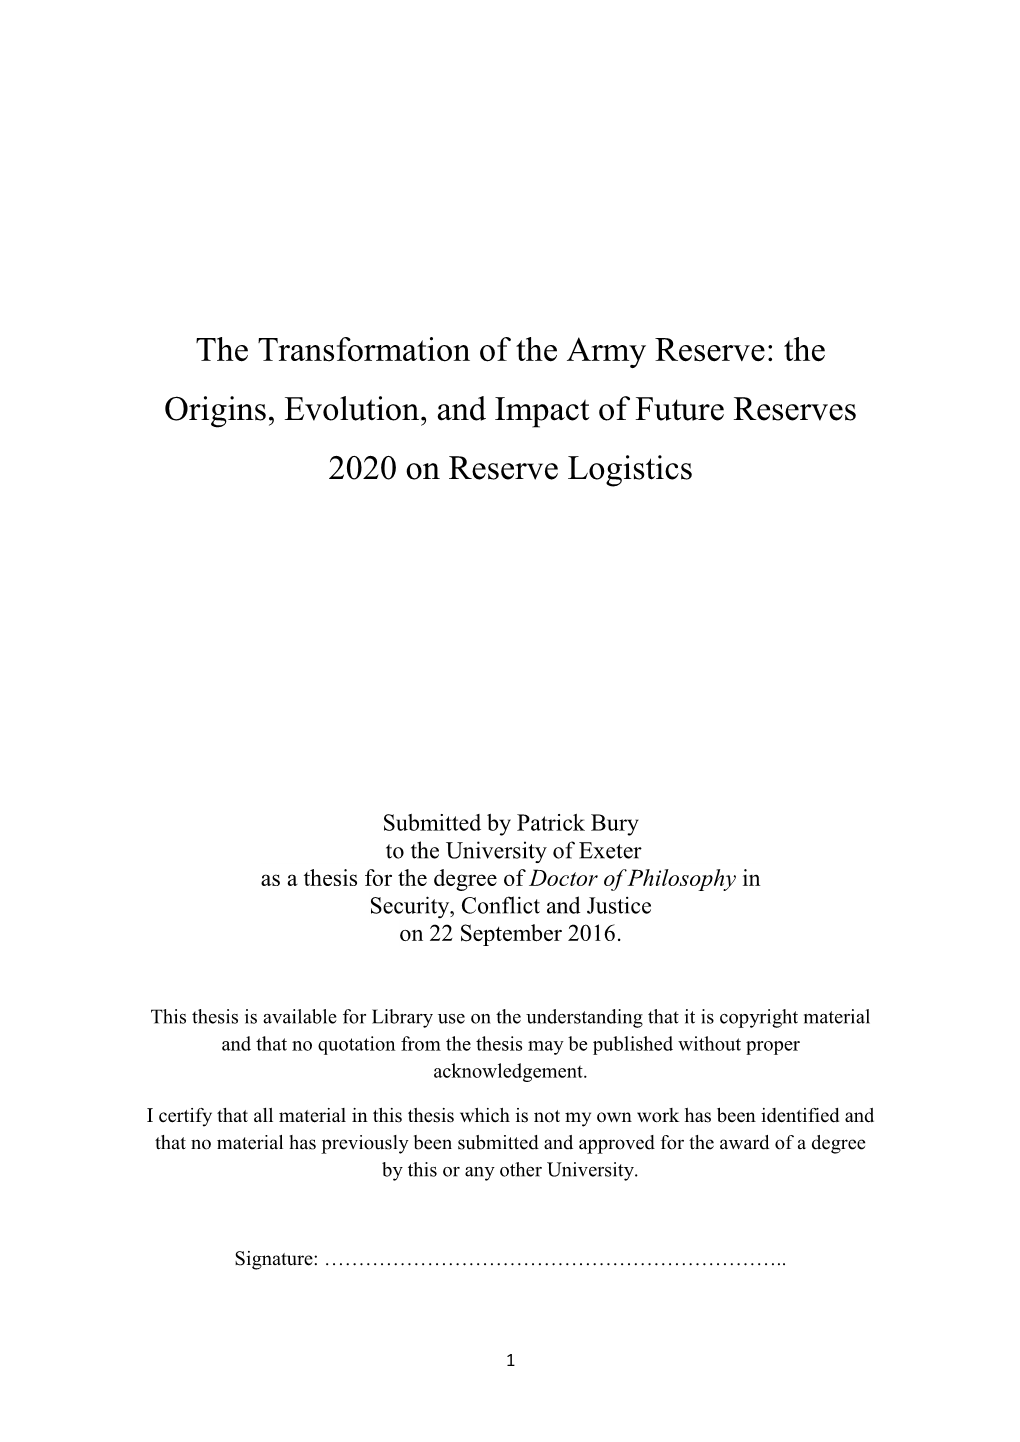 The Transformation of the Army Reserve: the Origins, Evolution, and Impact of Future Reserves 2020 on Reserve Logistics